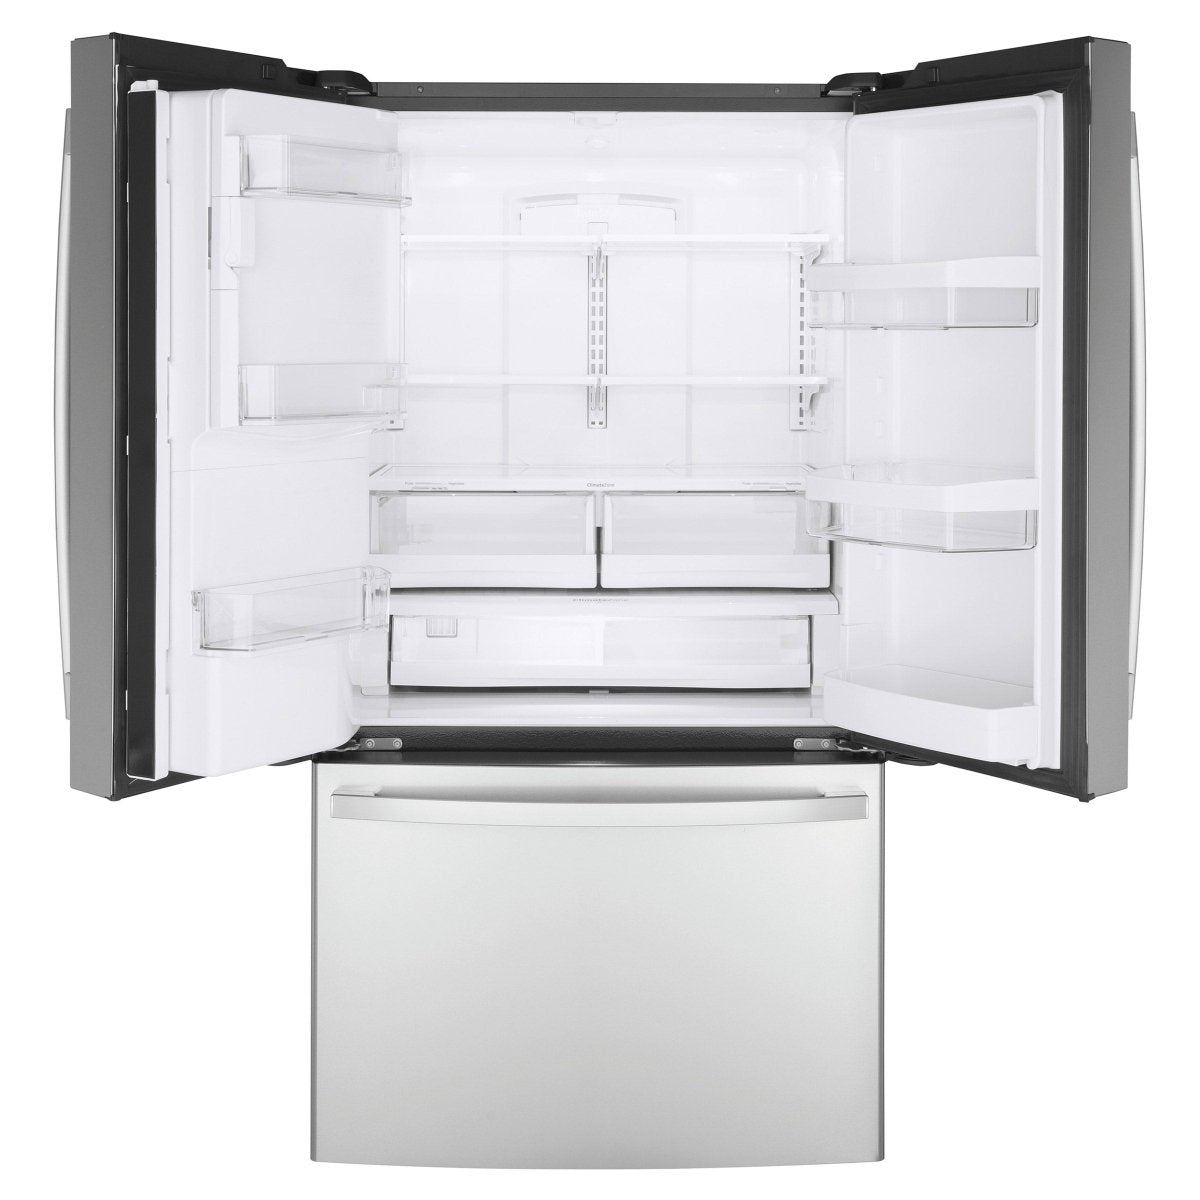 GE 22.1 Cu. Ft. Counter-Depth French Door Refrigerator with Twinchill Evaporators and Humidity Controlled Drawers - Alpine Outlets